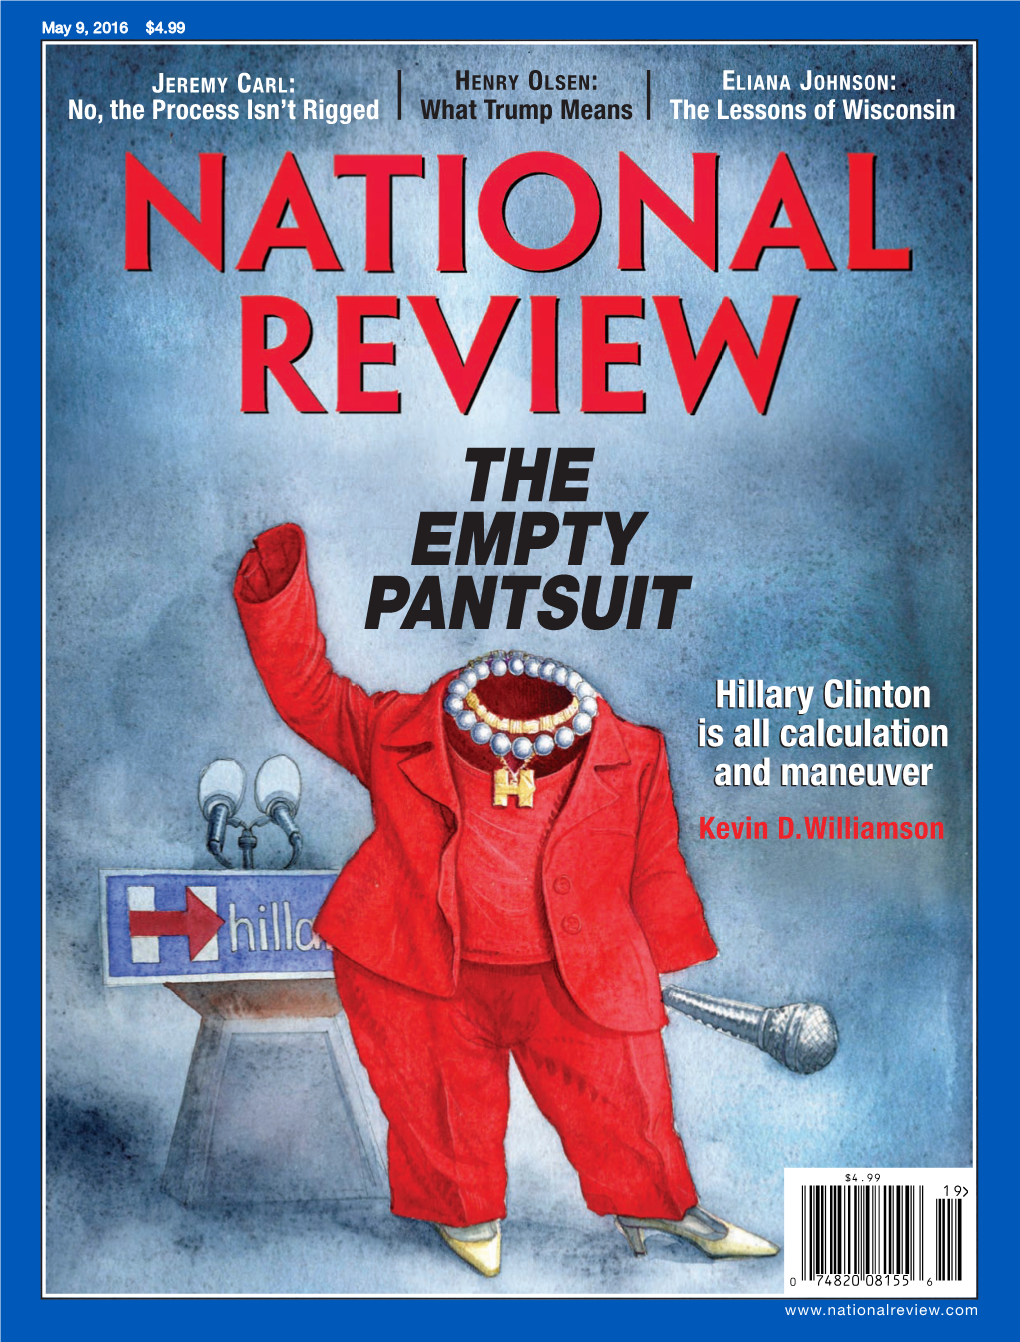 THE EMPTY PANTSUIT Hillary Clinton Is All Calculation and Maneuver Kevin D.Williamson